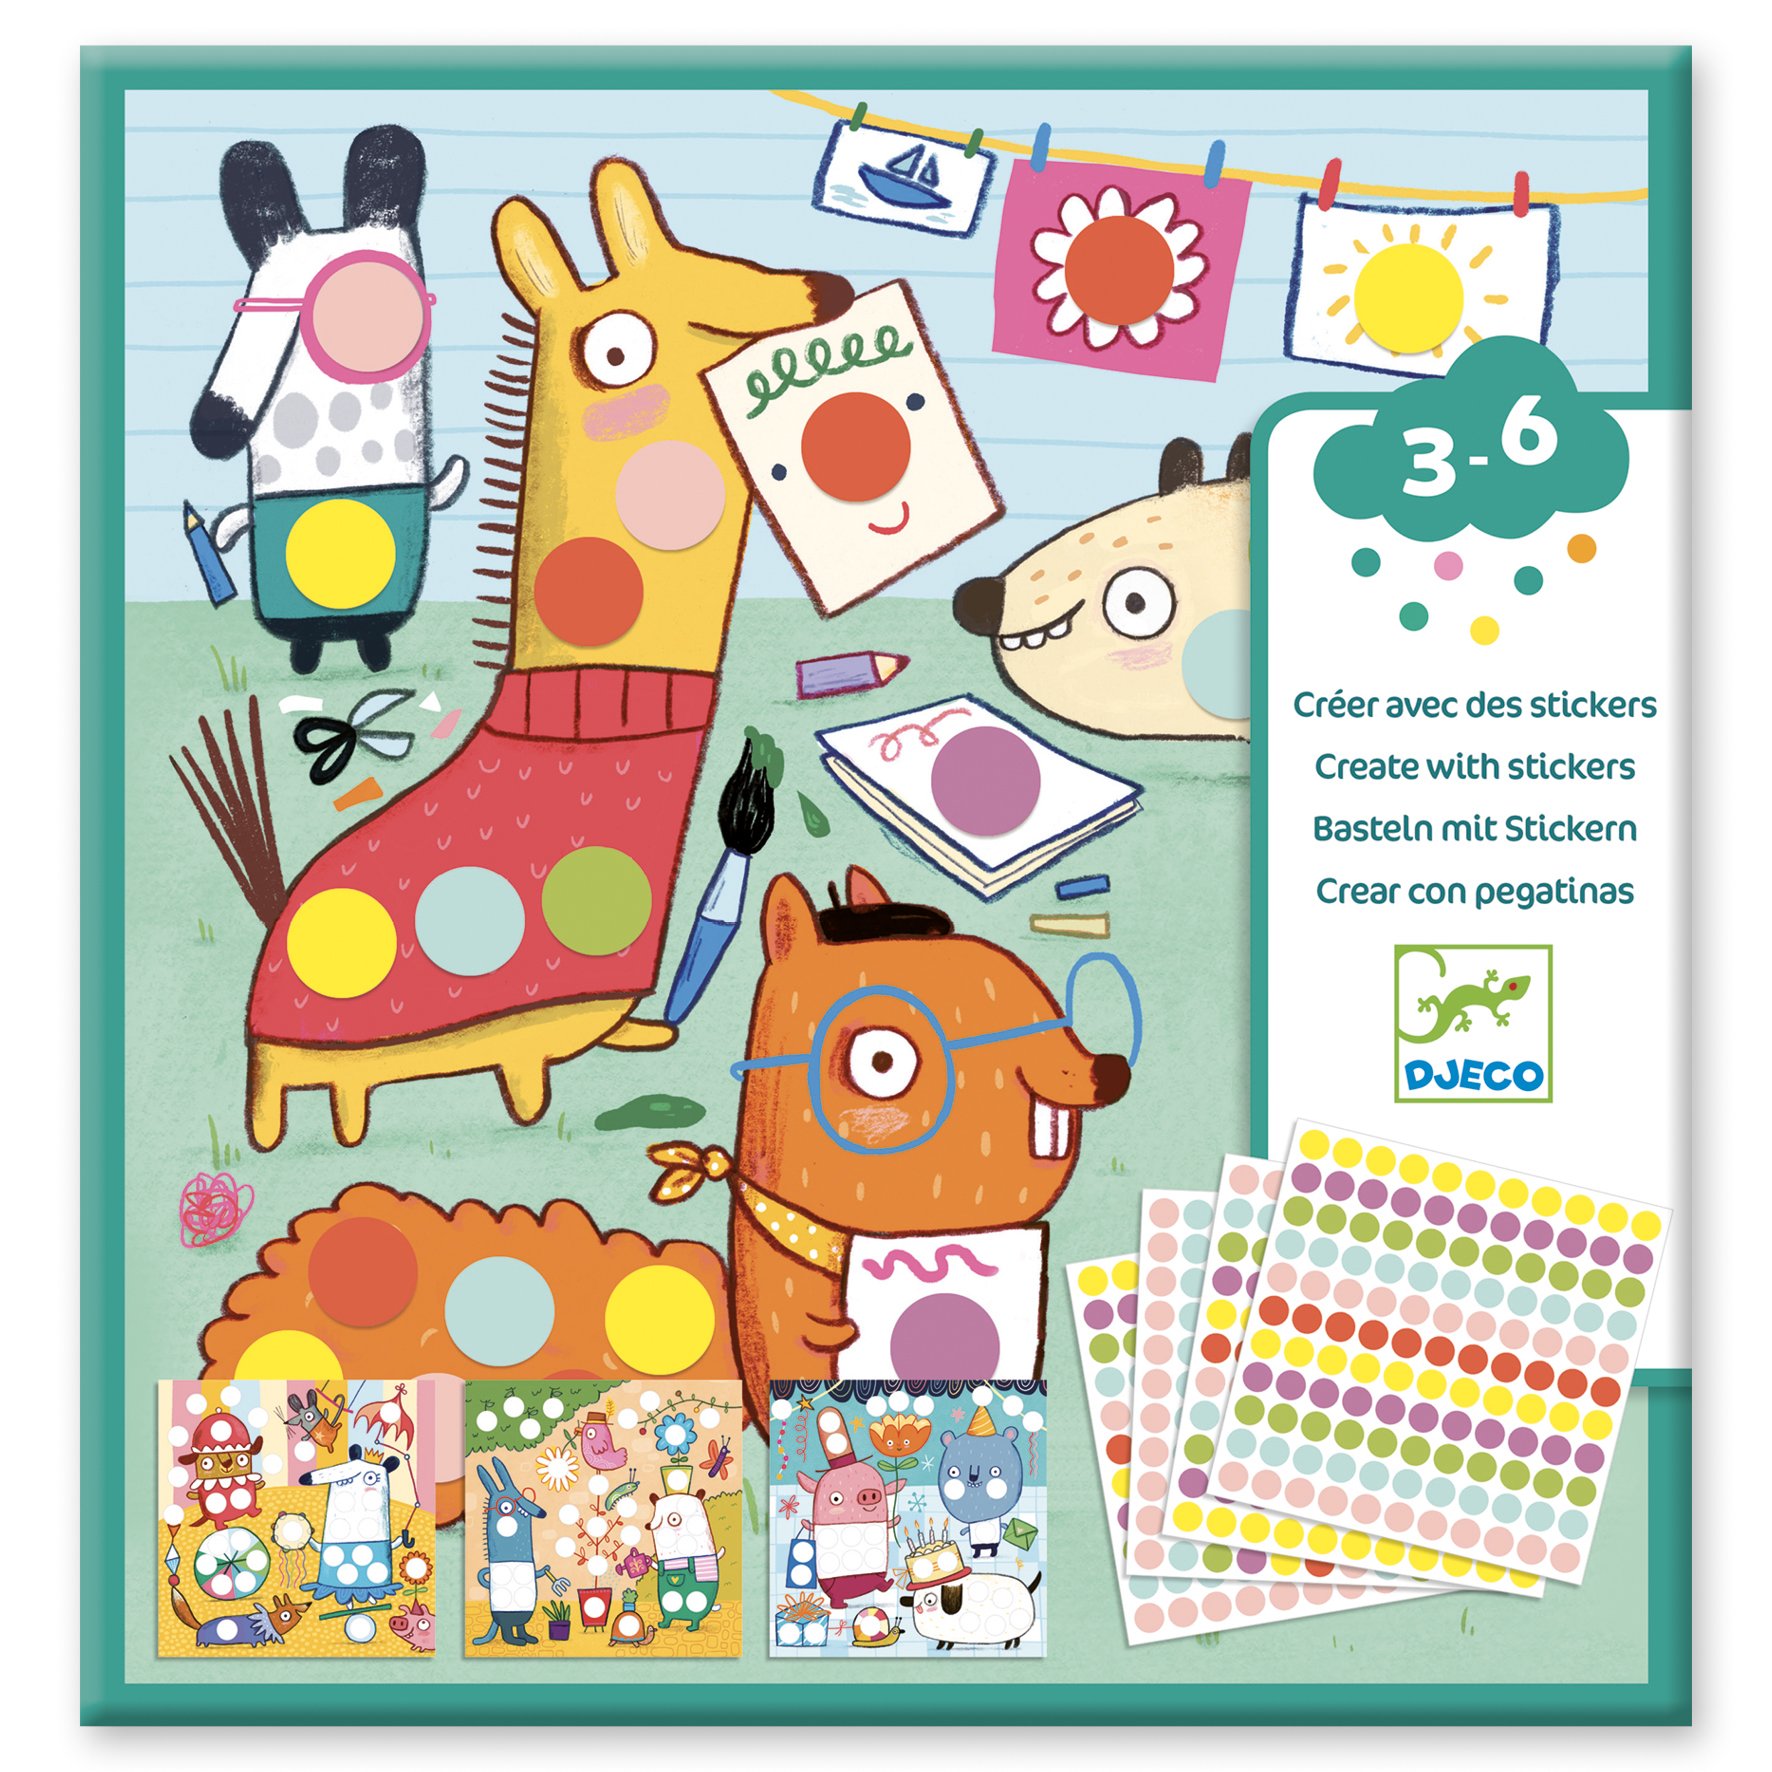 Gommettes Animaux domestiques : 20 stickers